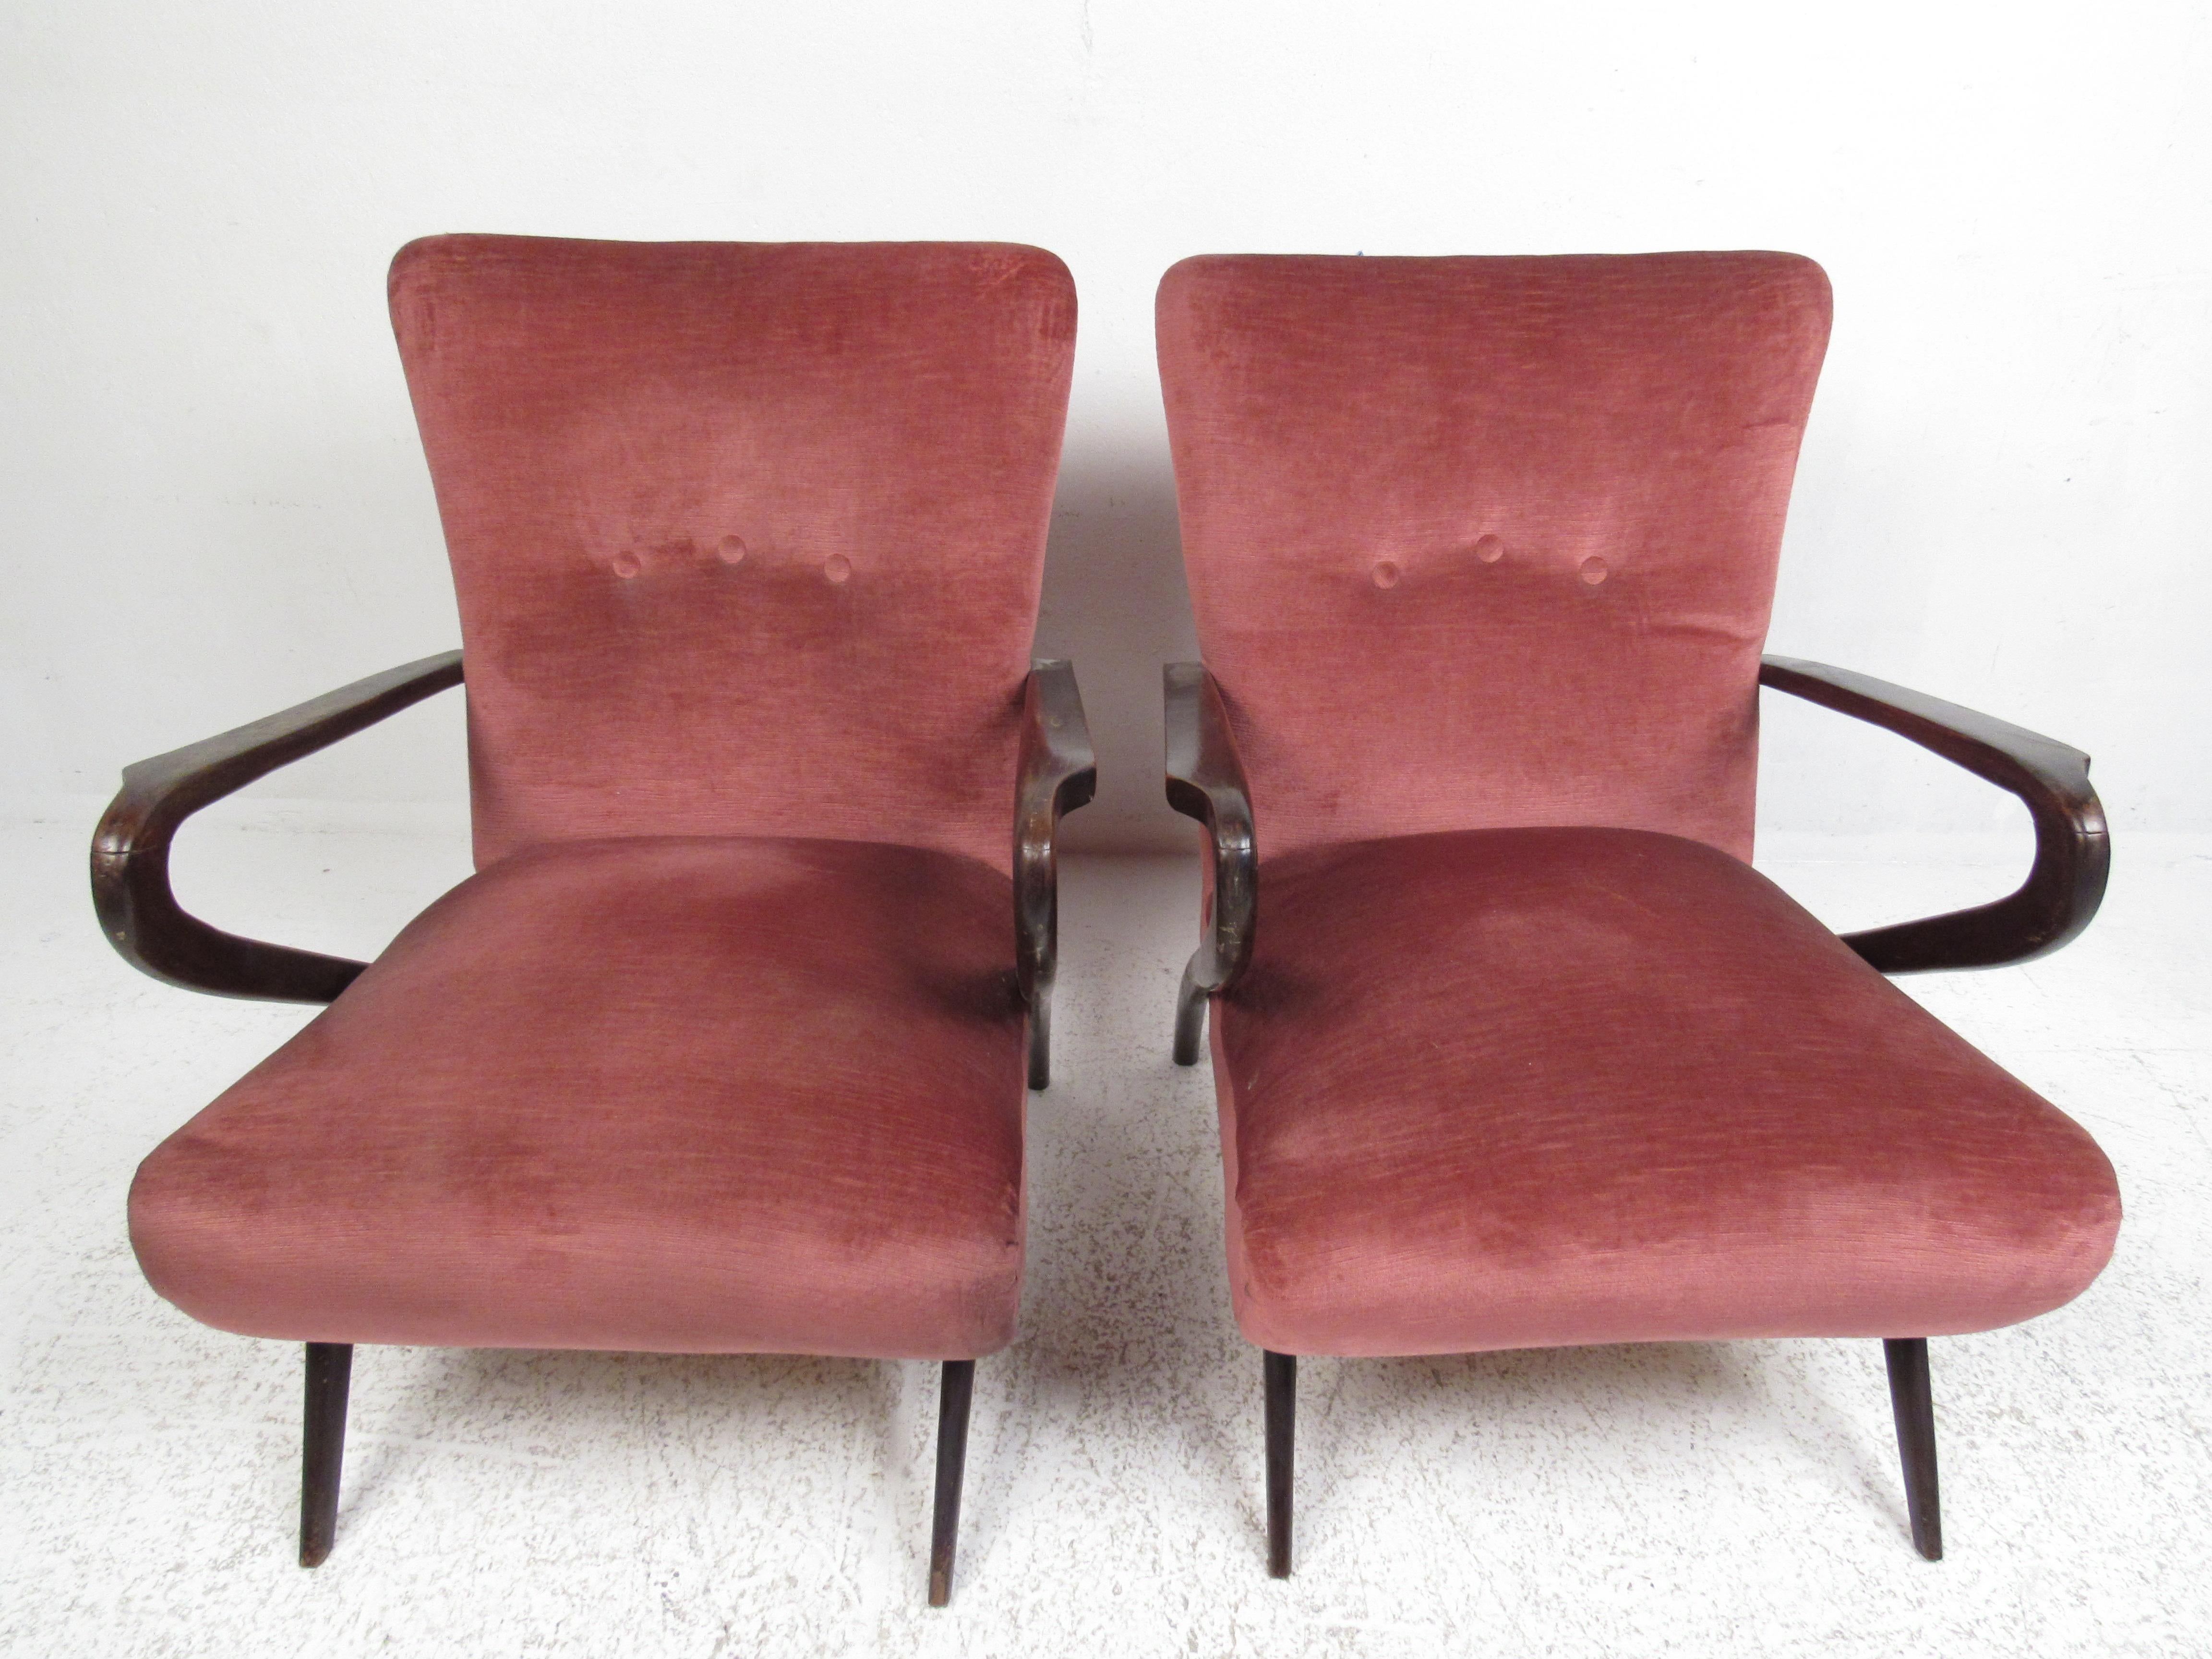 Stylish and sculptural open armchairs by renowned Italian artist Paolo Buffa. Sleek timeless design, perfect for that midcentury home or office environment. Please confirm item location (NY or NJ) with dealer.